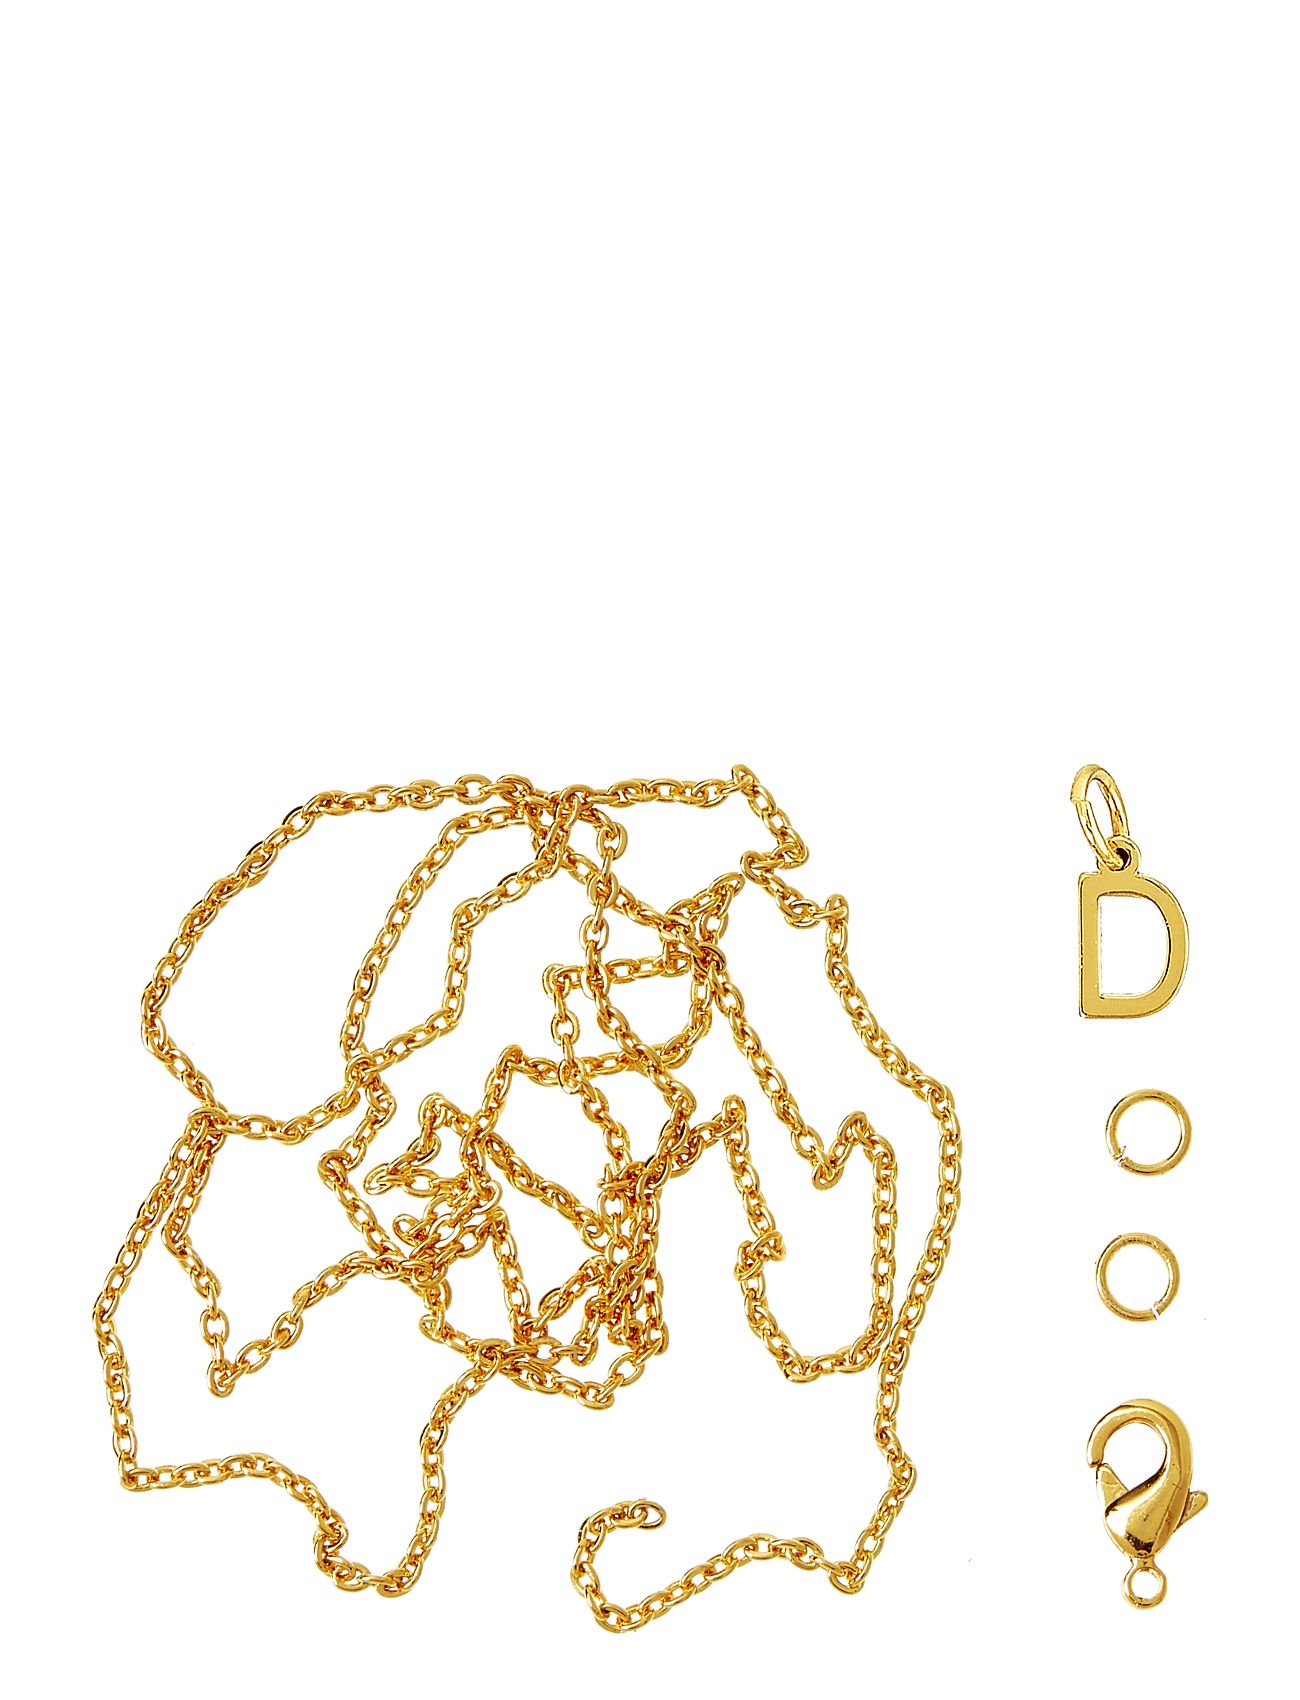 Letter D Gp With O-Ring, Chain And Clasp Toys Creativity Drawing & Crafts Craft Jewellery & Accessories Gold Me & My Box